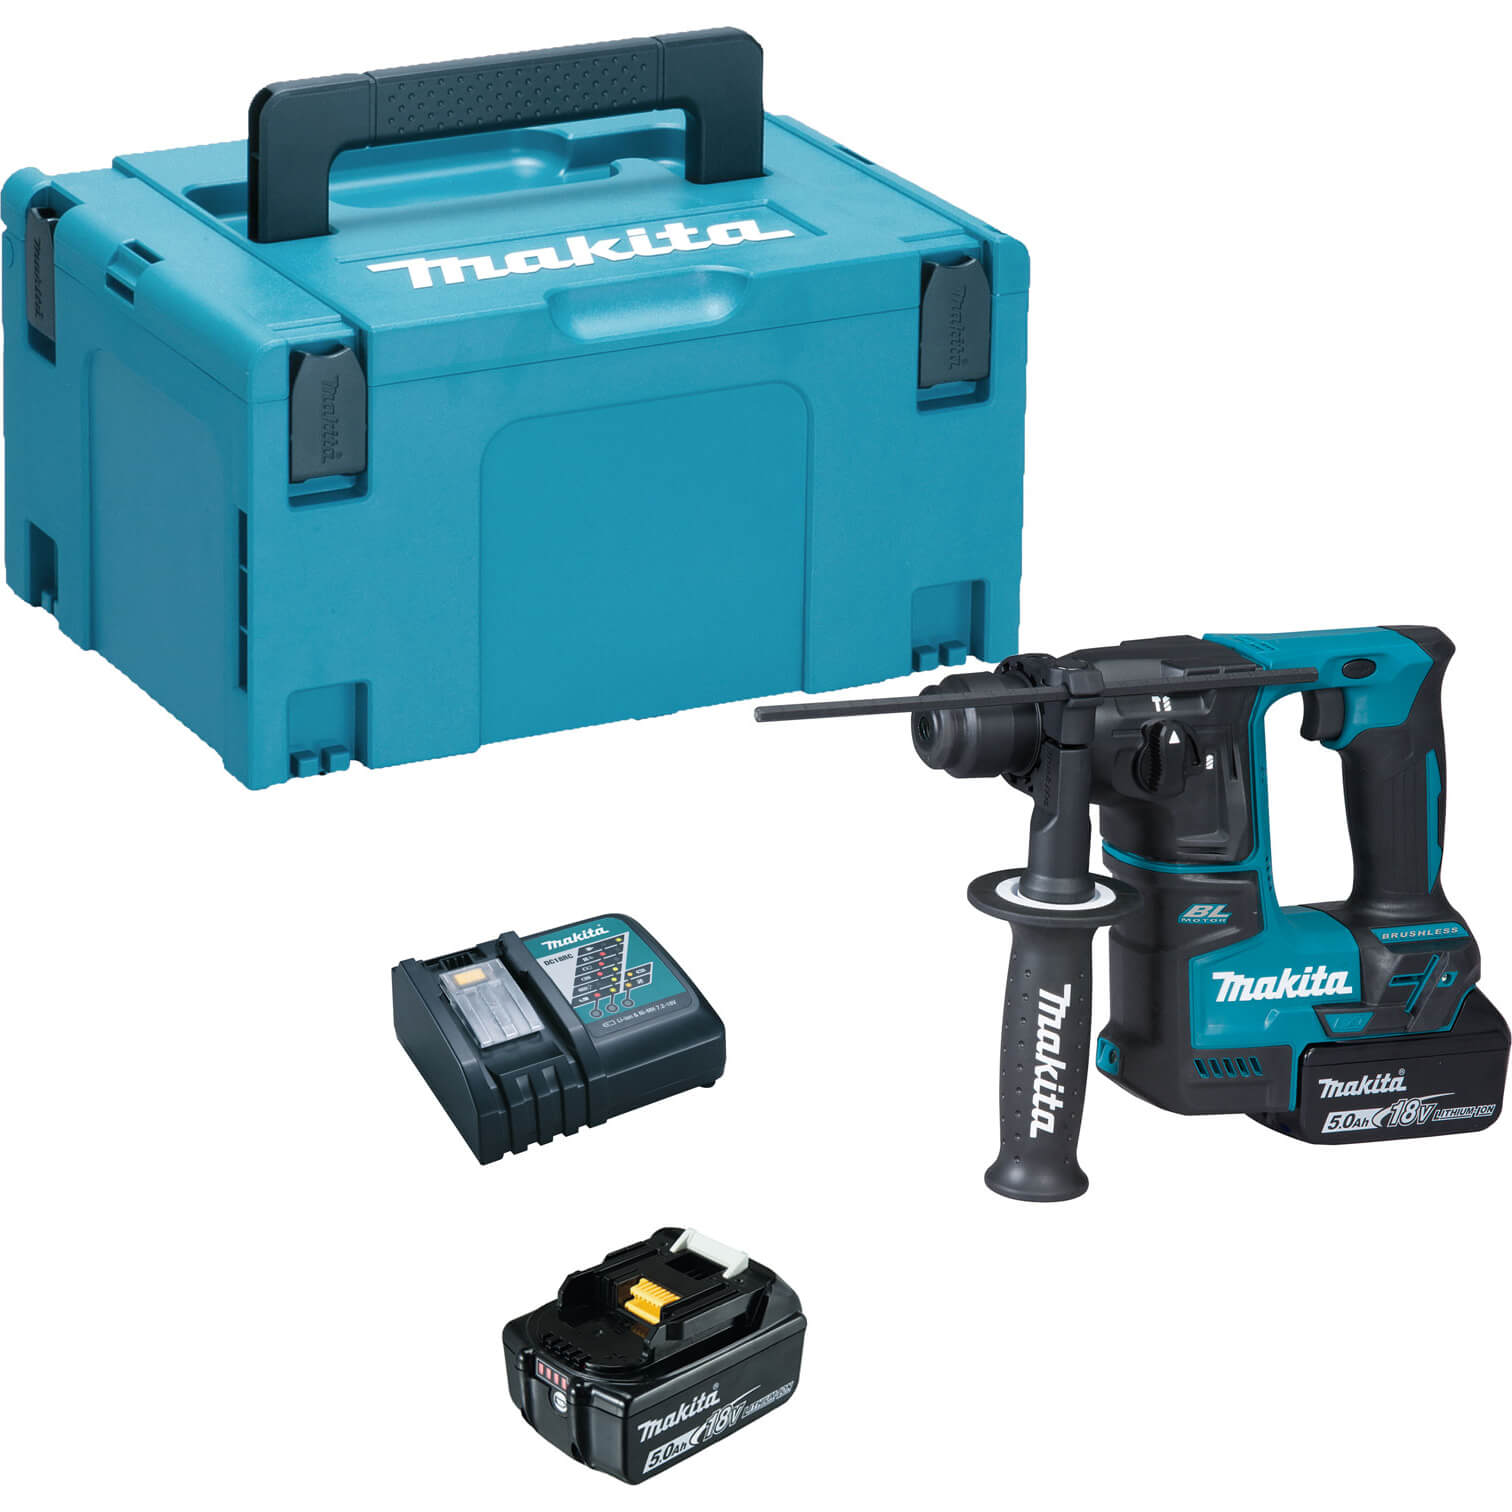 Image of Makita DHR171 18v LXT Cordless Brushless SDS Hammer Drill 2 x 5ah Li-ion Charger Case